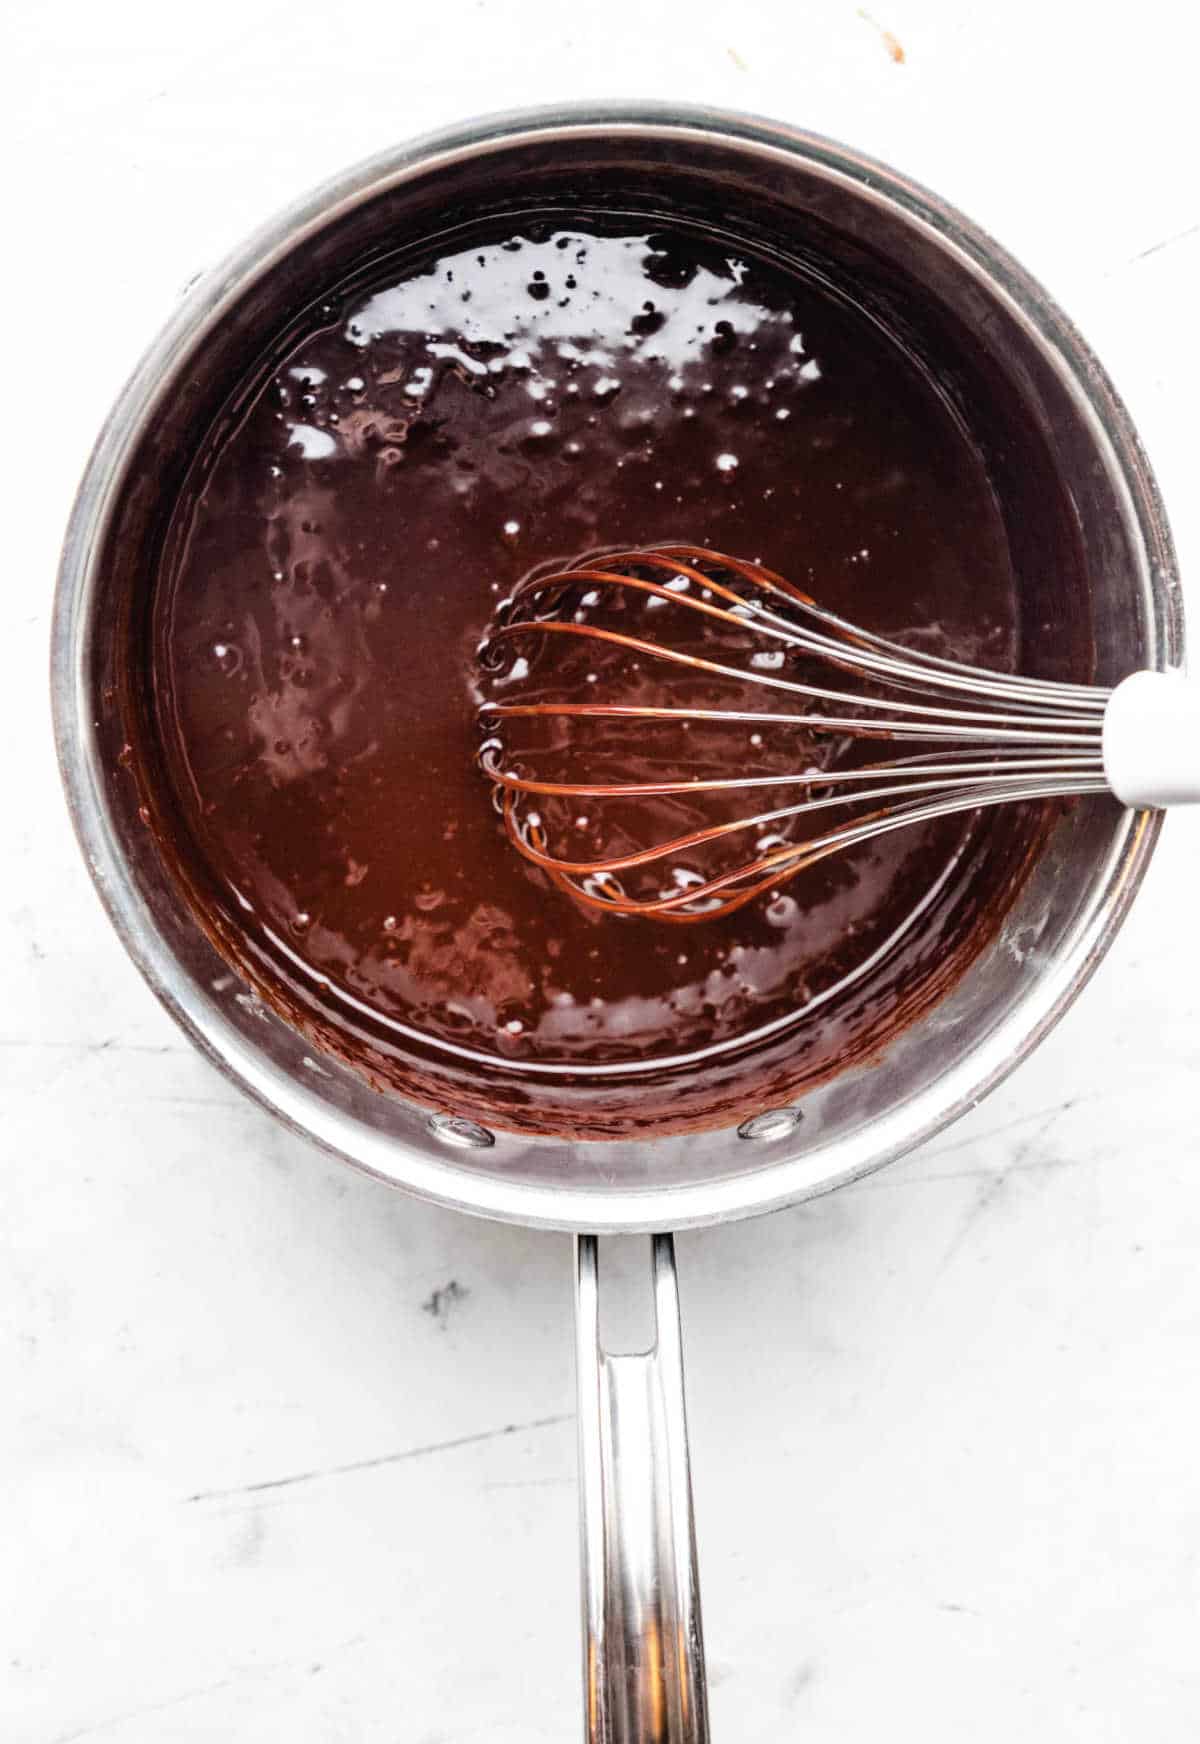 Dry ingredients whisked into melted chocolate mixture in a saucepan.